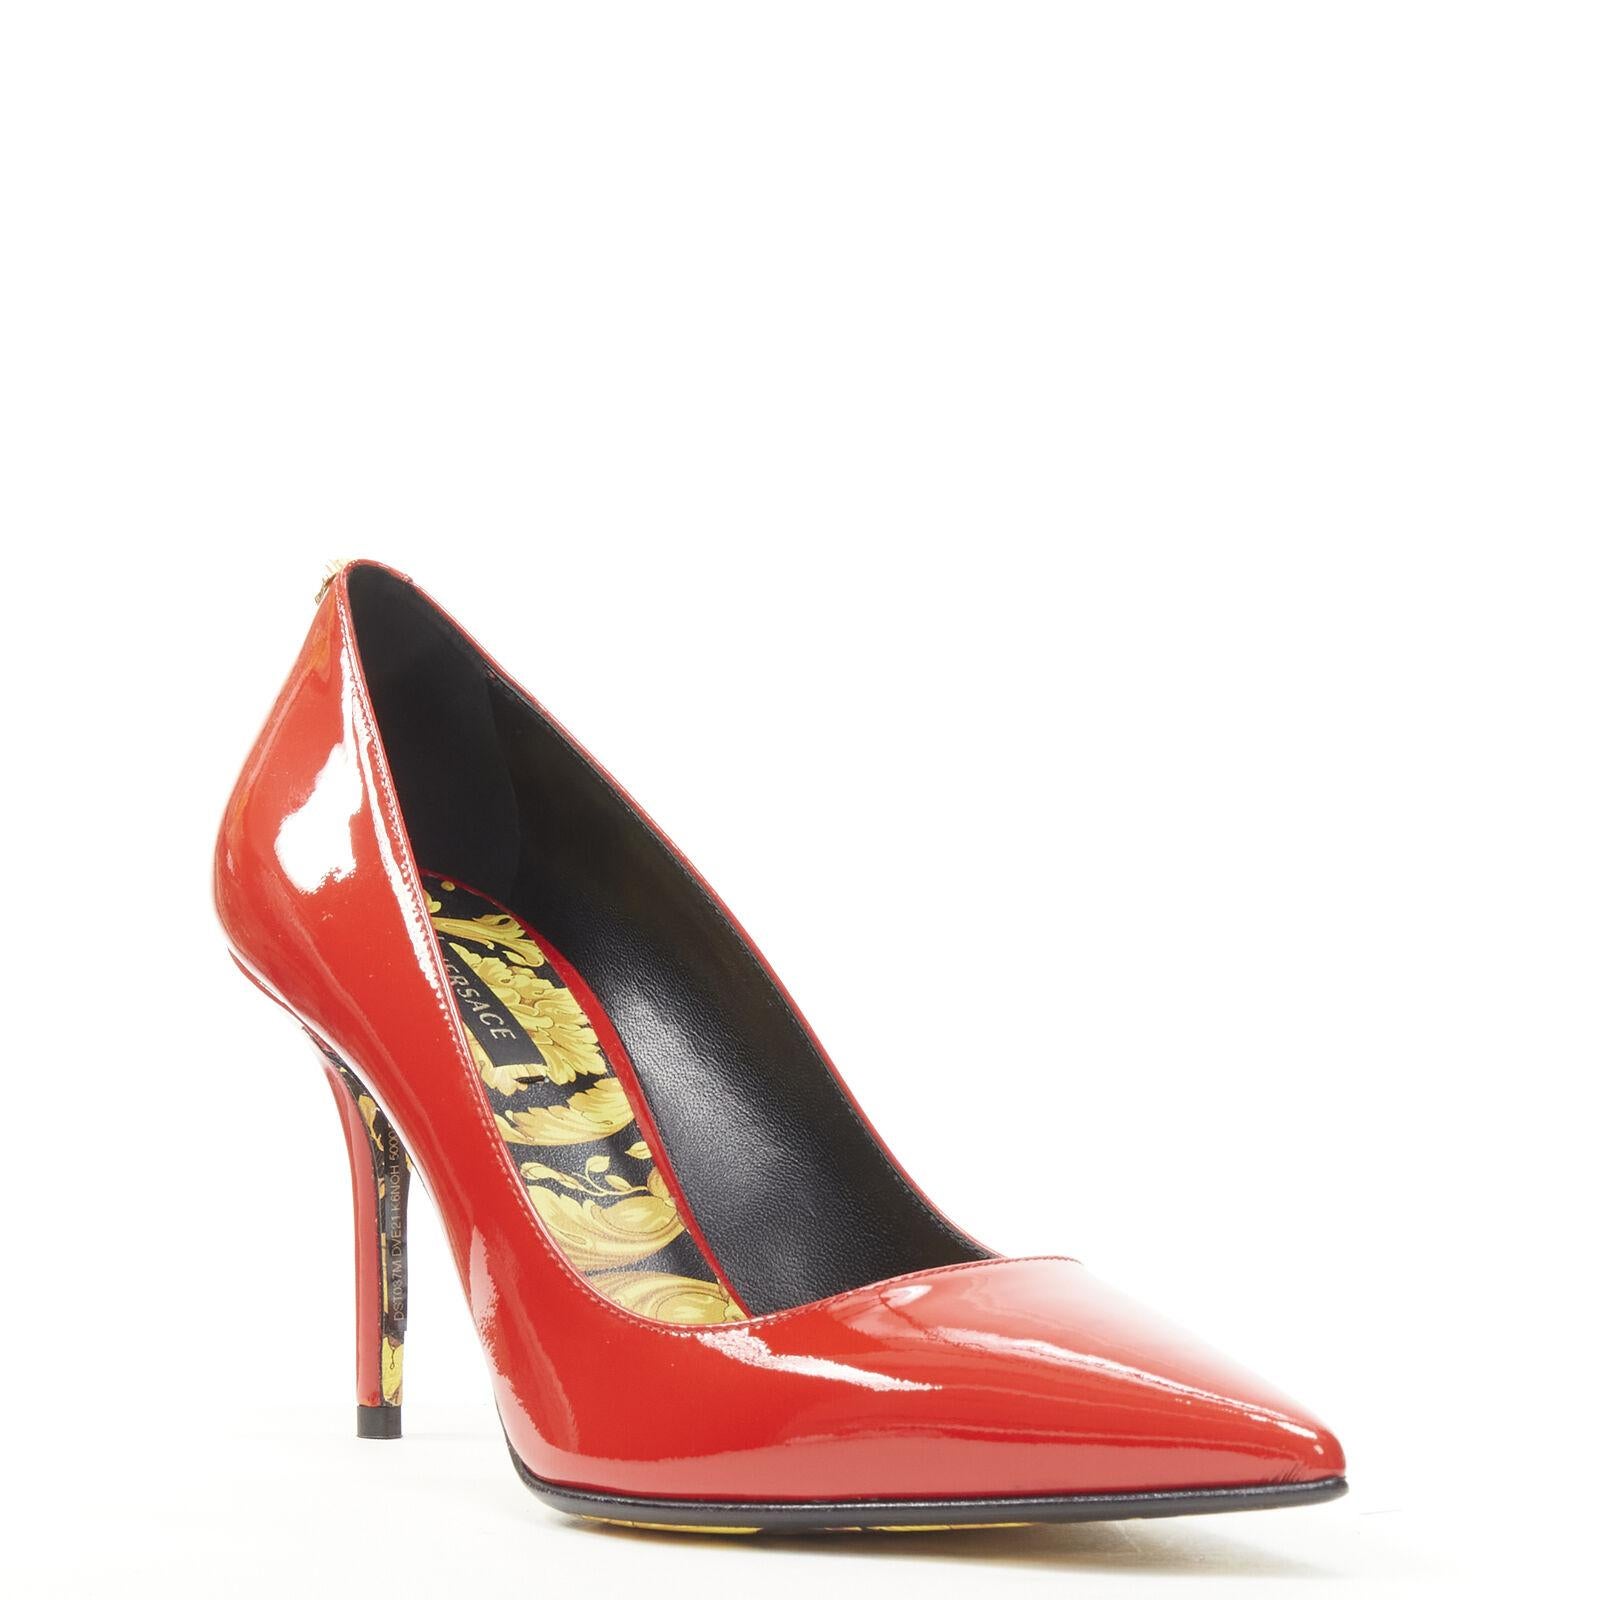 new VERSACE Hibiscus Barocco gold sole red patent Medusa stud pump EU38.5
Reference: TGAS/C01204
Brand: Versace
Designer: Donatella Versace
Model: DST037M DVE21 K5NOH
Collection: Hibiscus Barocco
Material: Patent Leather
Color: Red, Gold
Pattern: